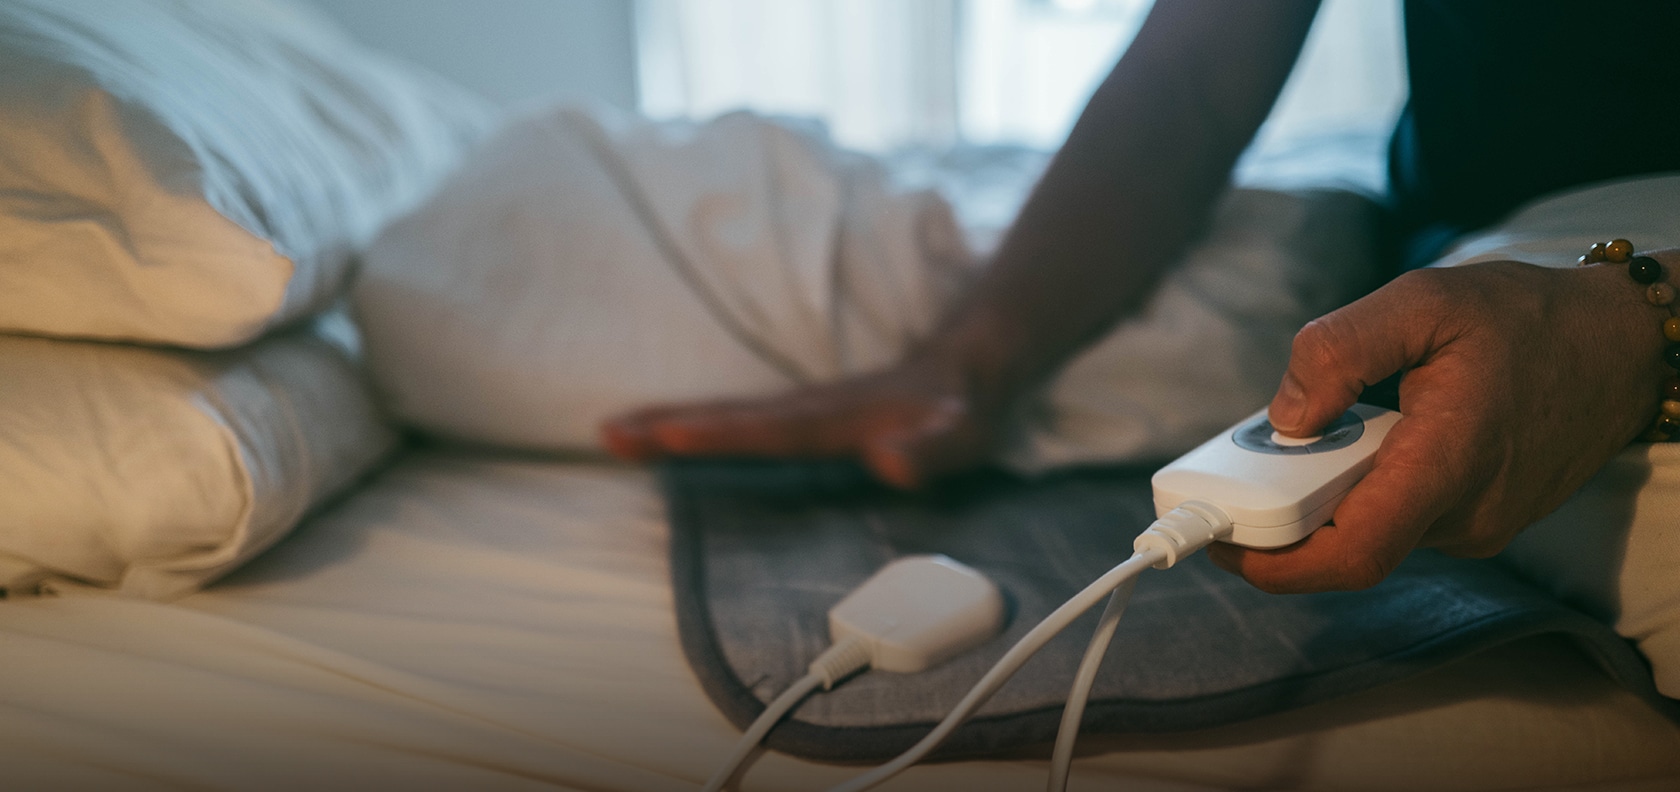 Electric Blanket and Heating Pad Safety - MAPFRE Insurance